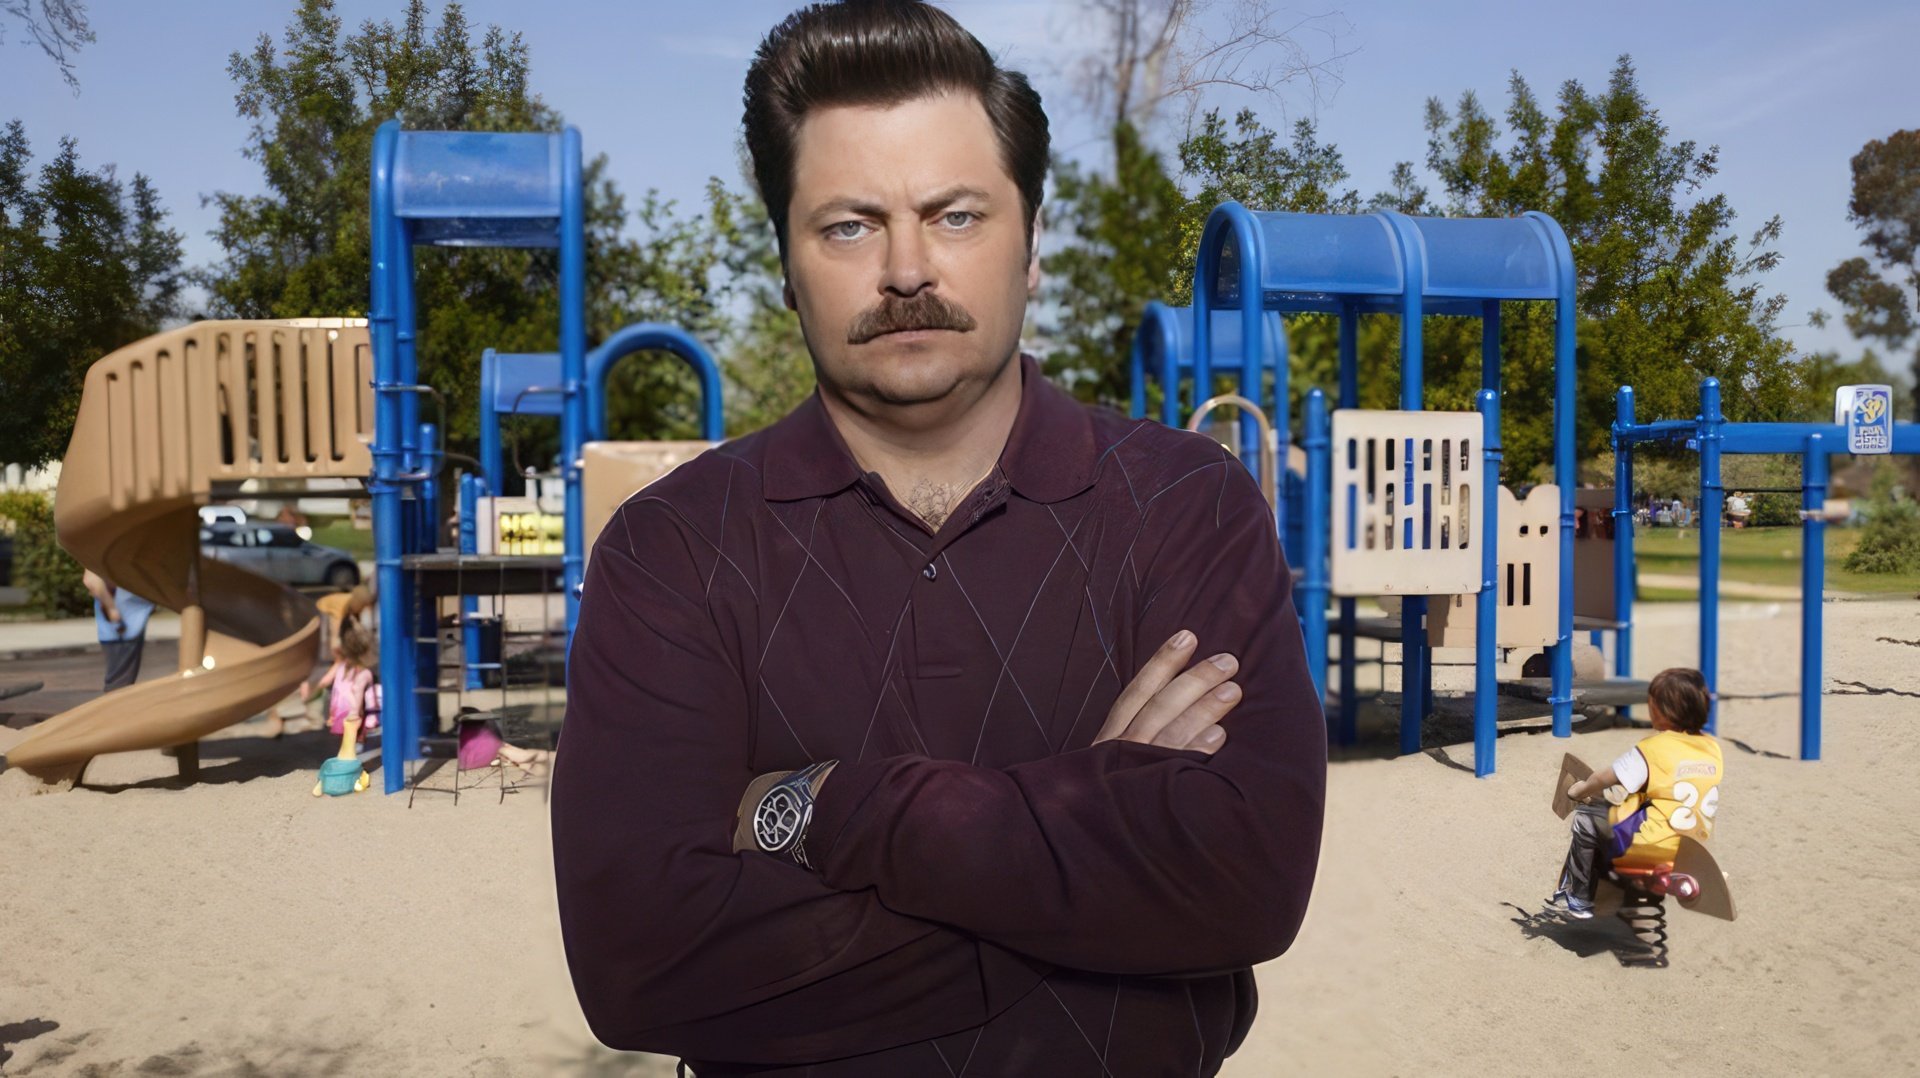 For his role as Ron Swanson, the actor was awarded the TCA Award